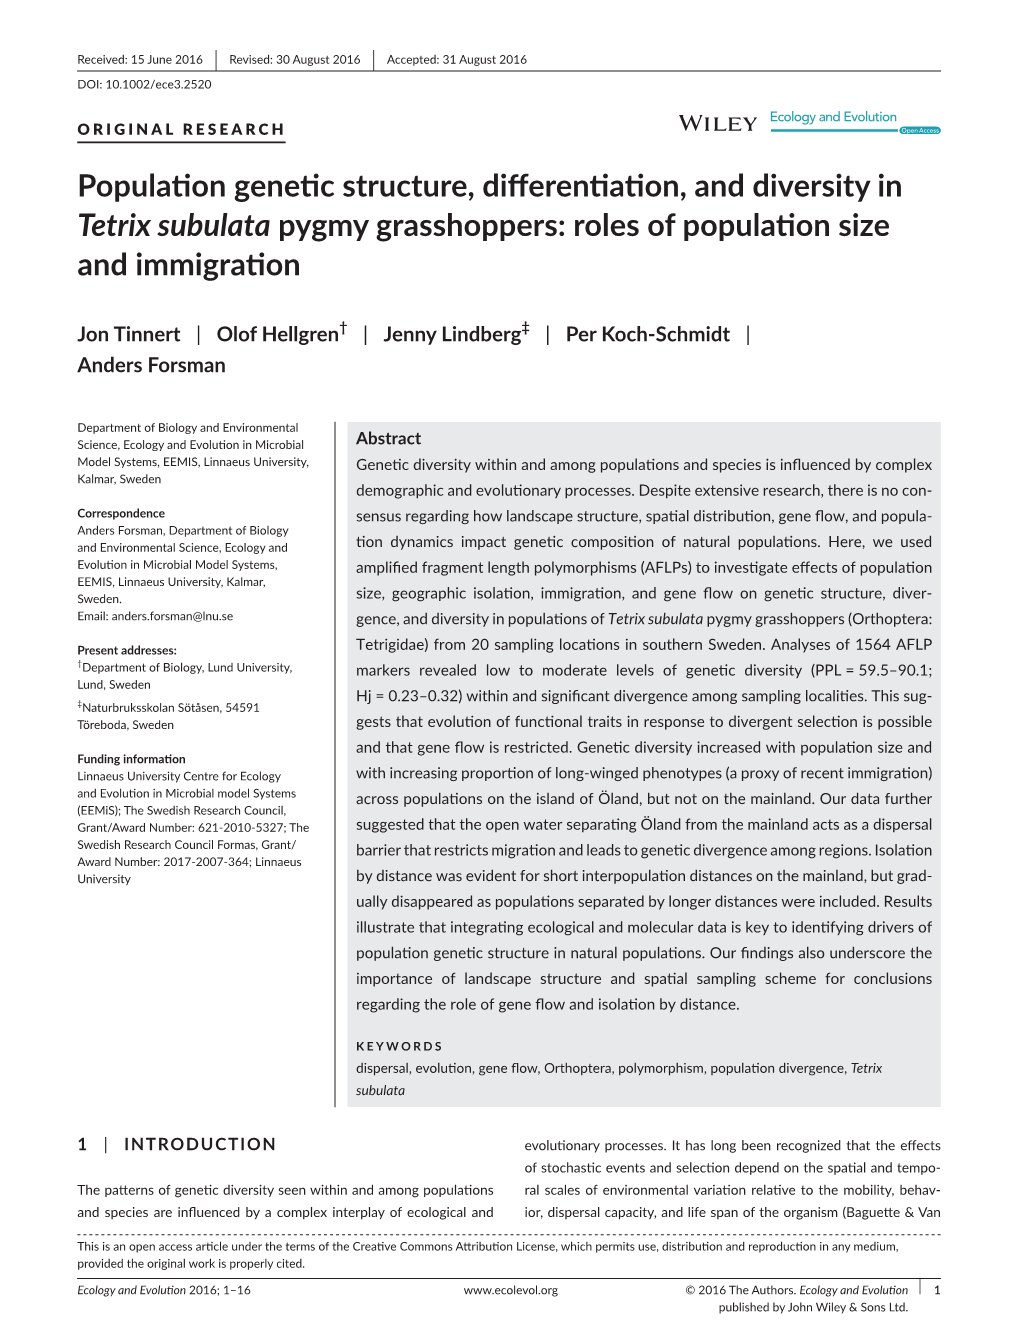 Population Genetic Structure, Differentiation, and Diversity in Tetrix Subulata Pygmy Grasshoppers: Roles of Population Size and Immigration